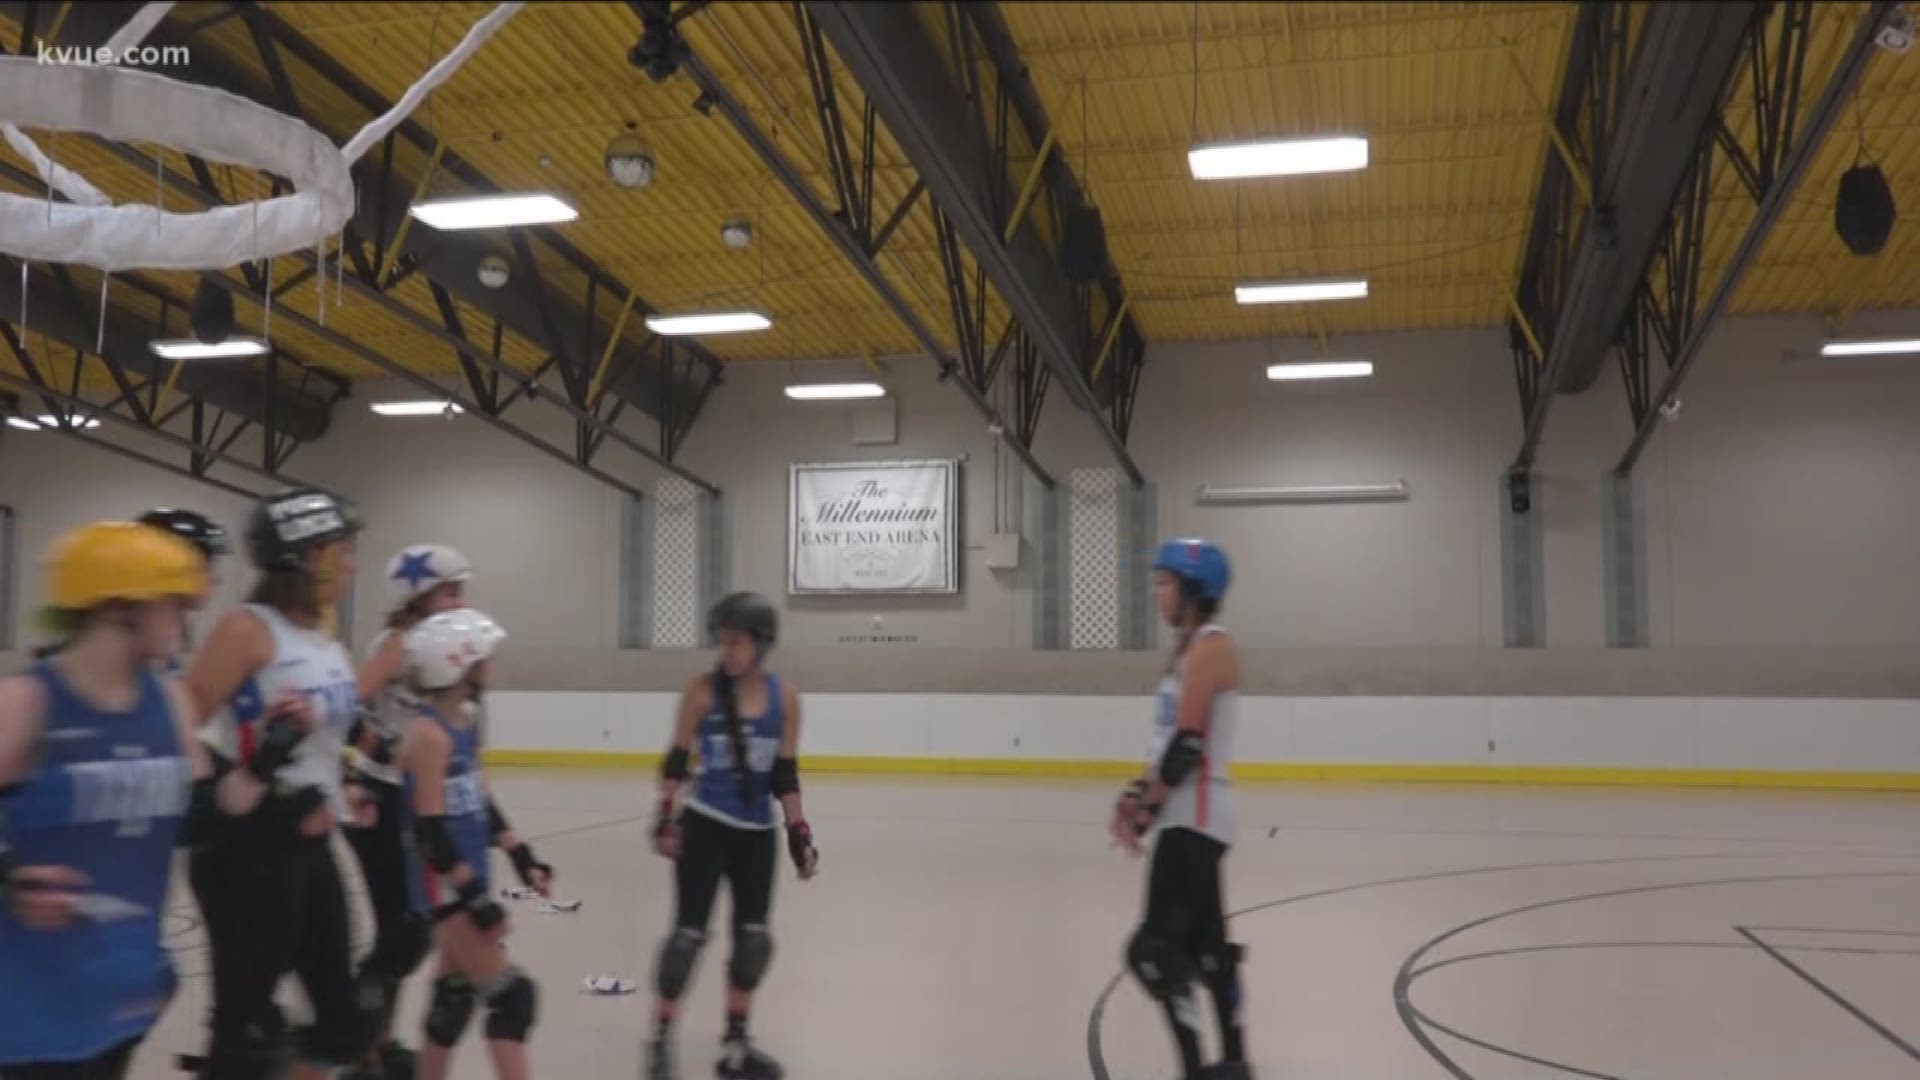 Rough sport with a welcoming message: Roller Derby